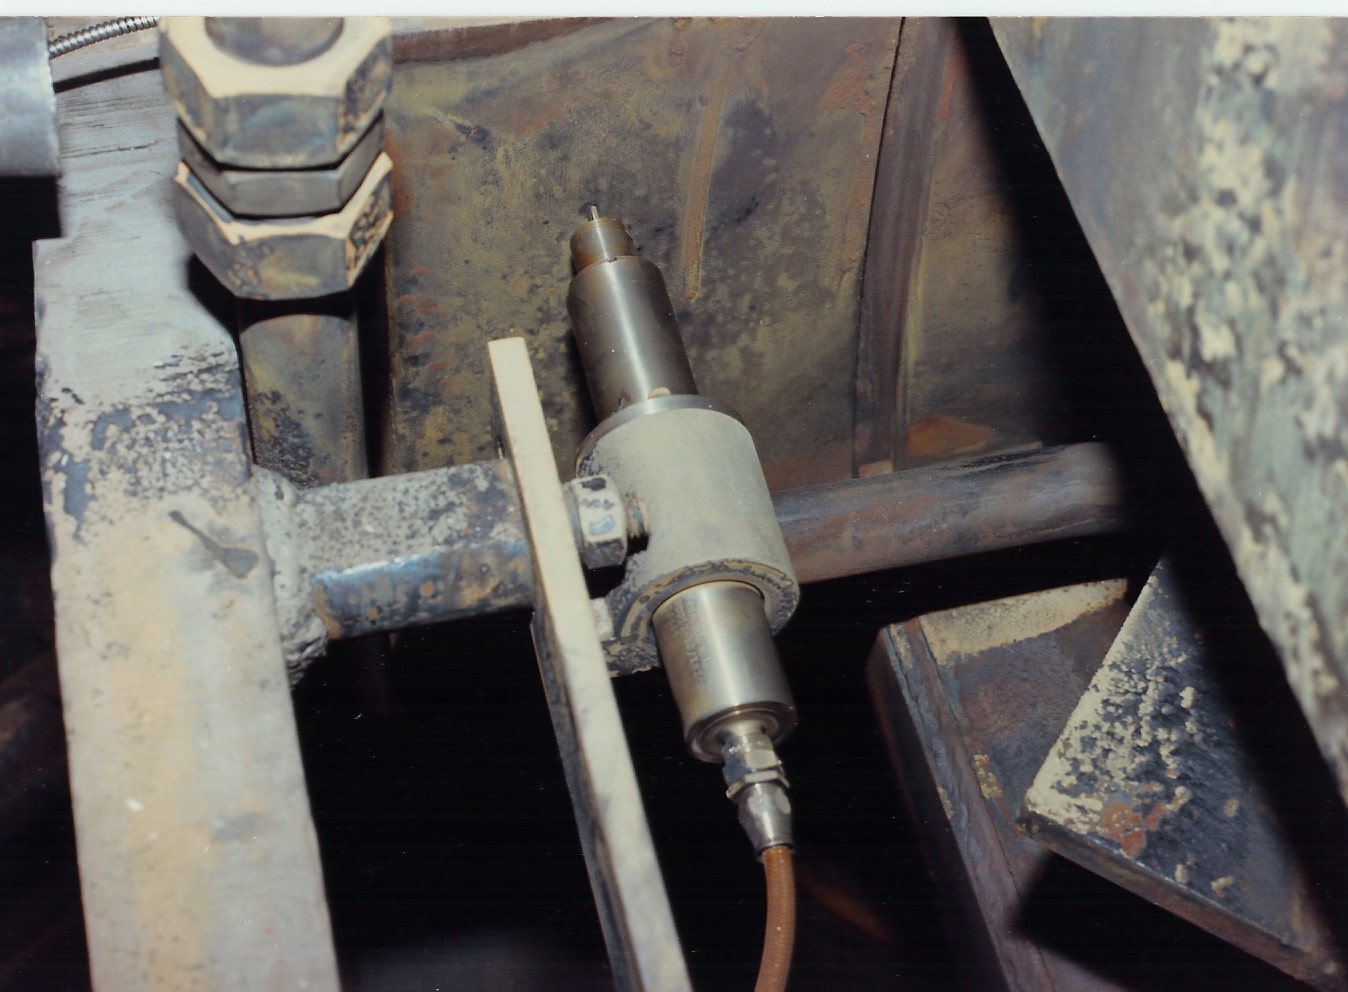 How And Why Are LVDTs Used To Measure Casing Expansion On Steam Turbines?